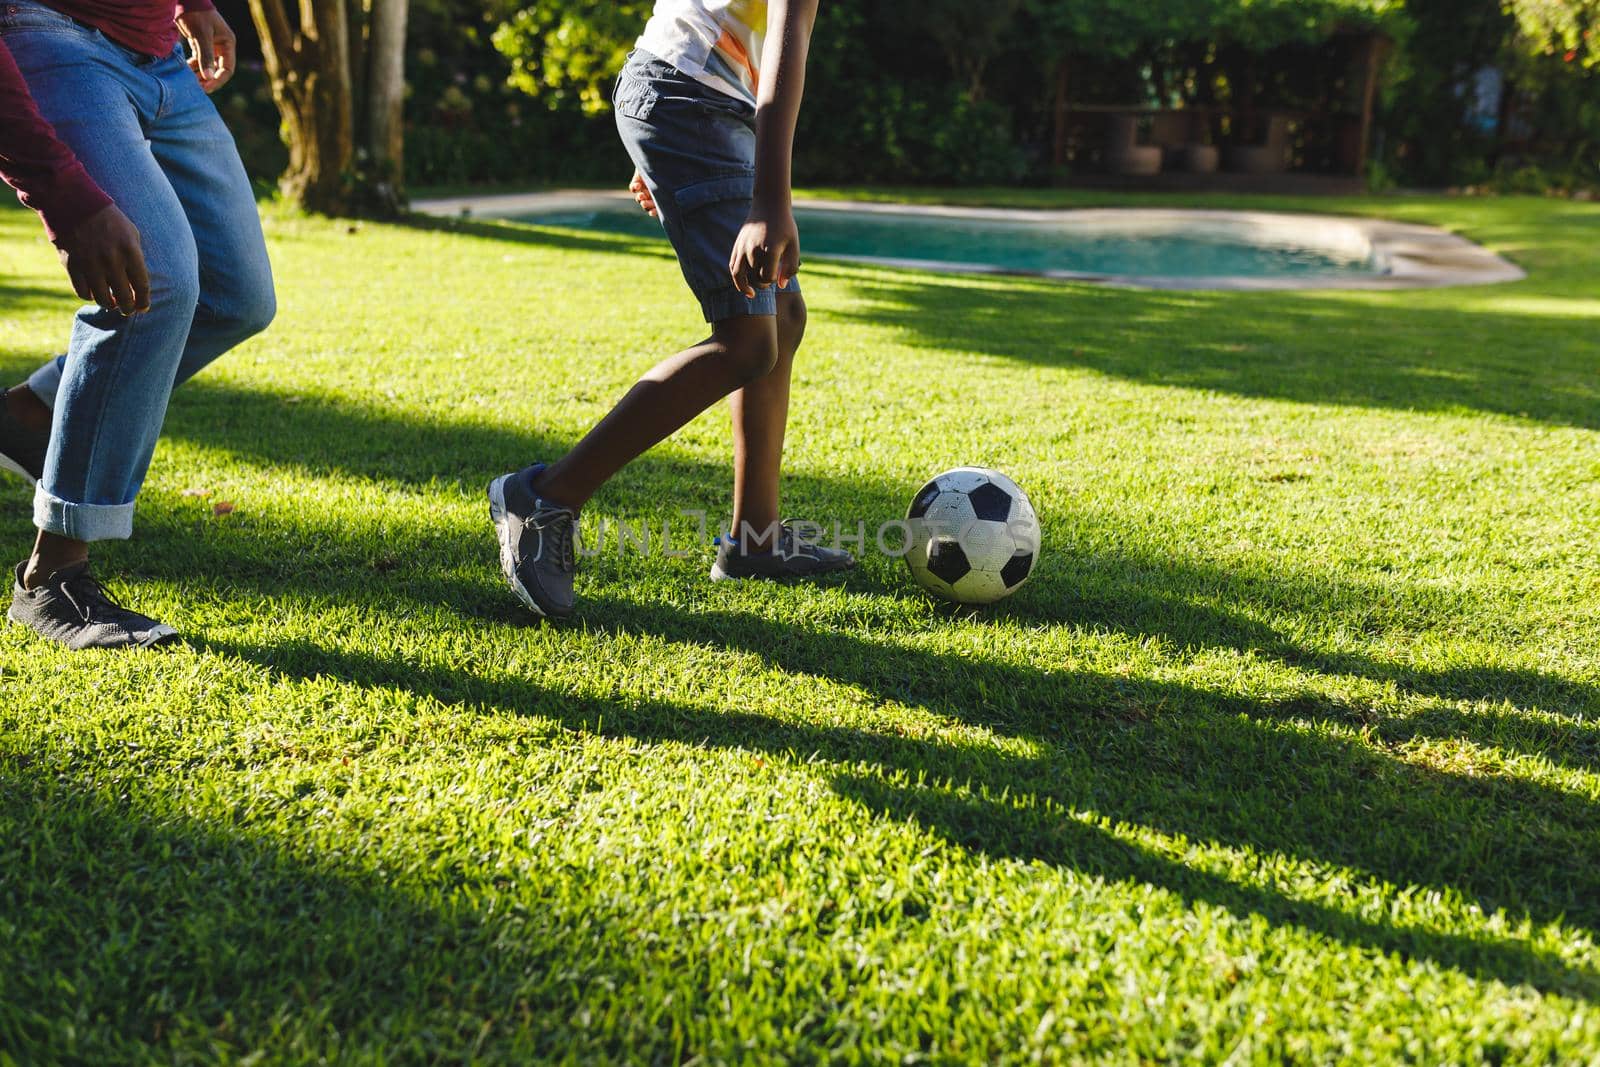 African american father with son having fun and playing football in garden. family spending time at home.